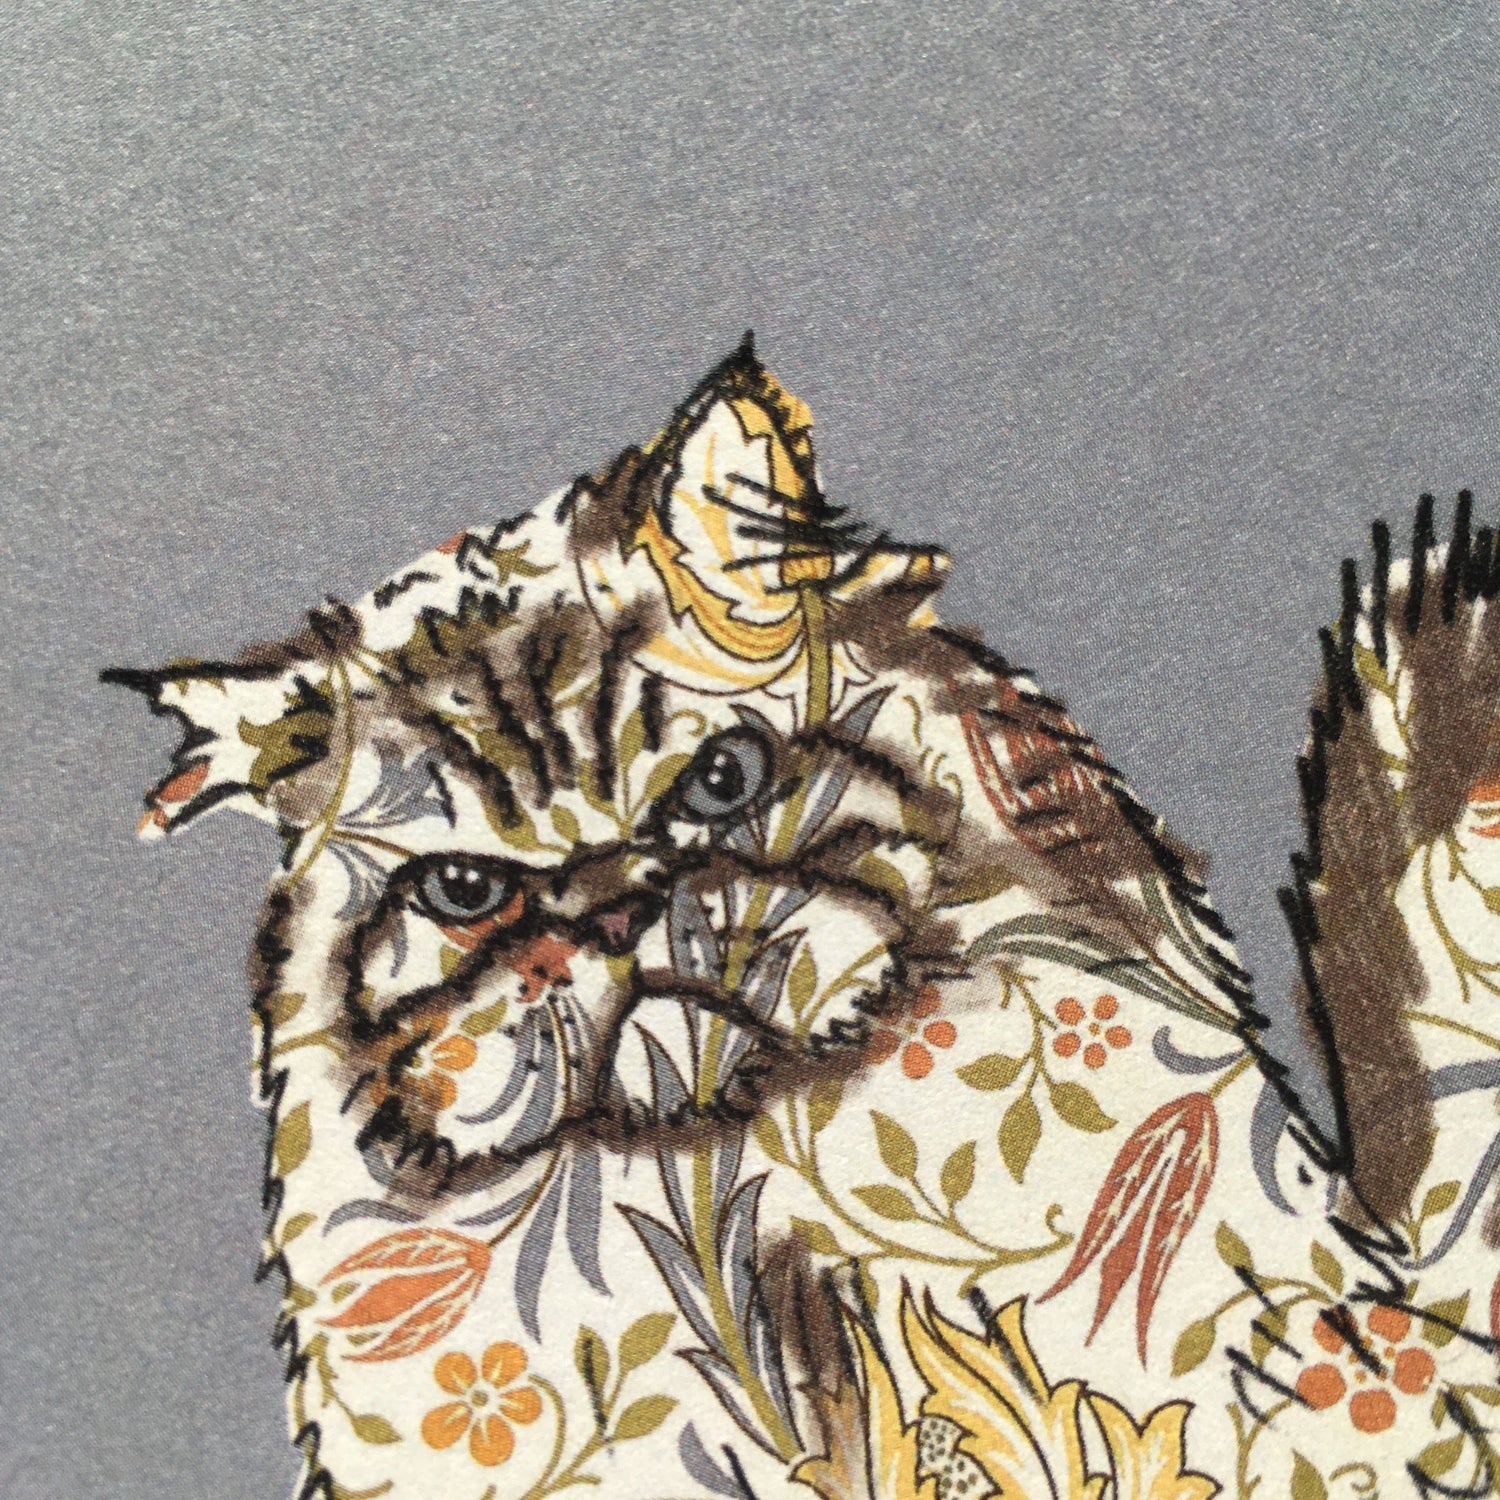 Grumpy Cat with William Morris coat - The Paper People Greeting Cards